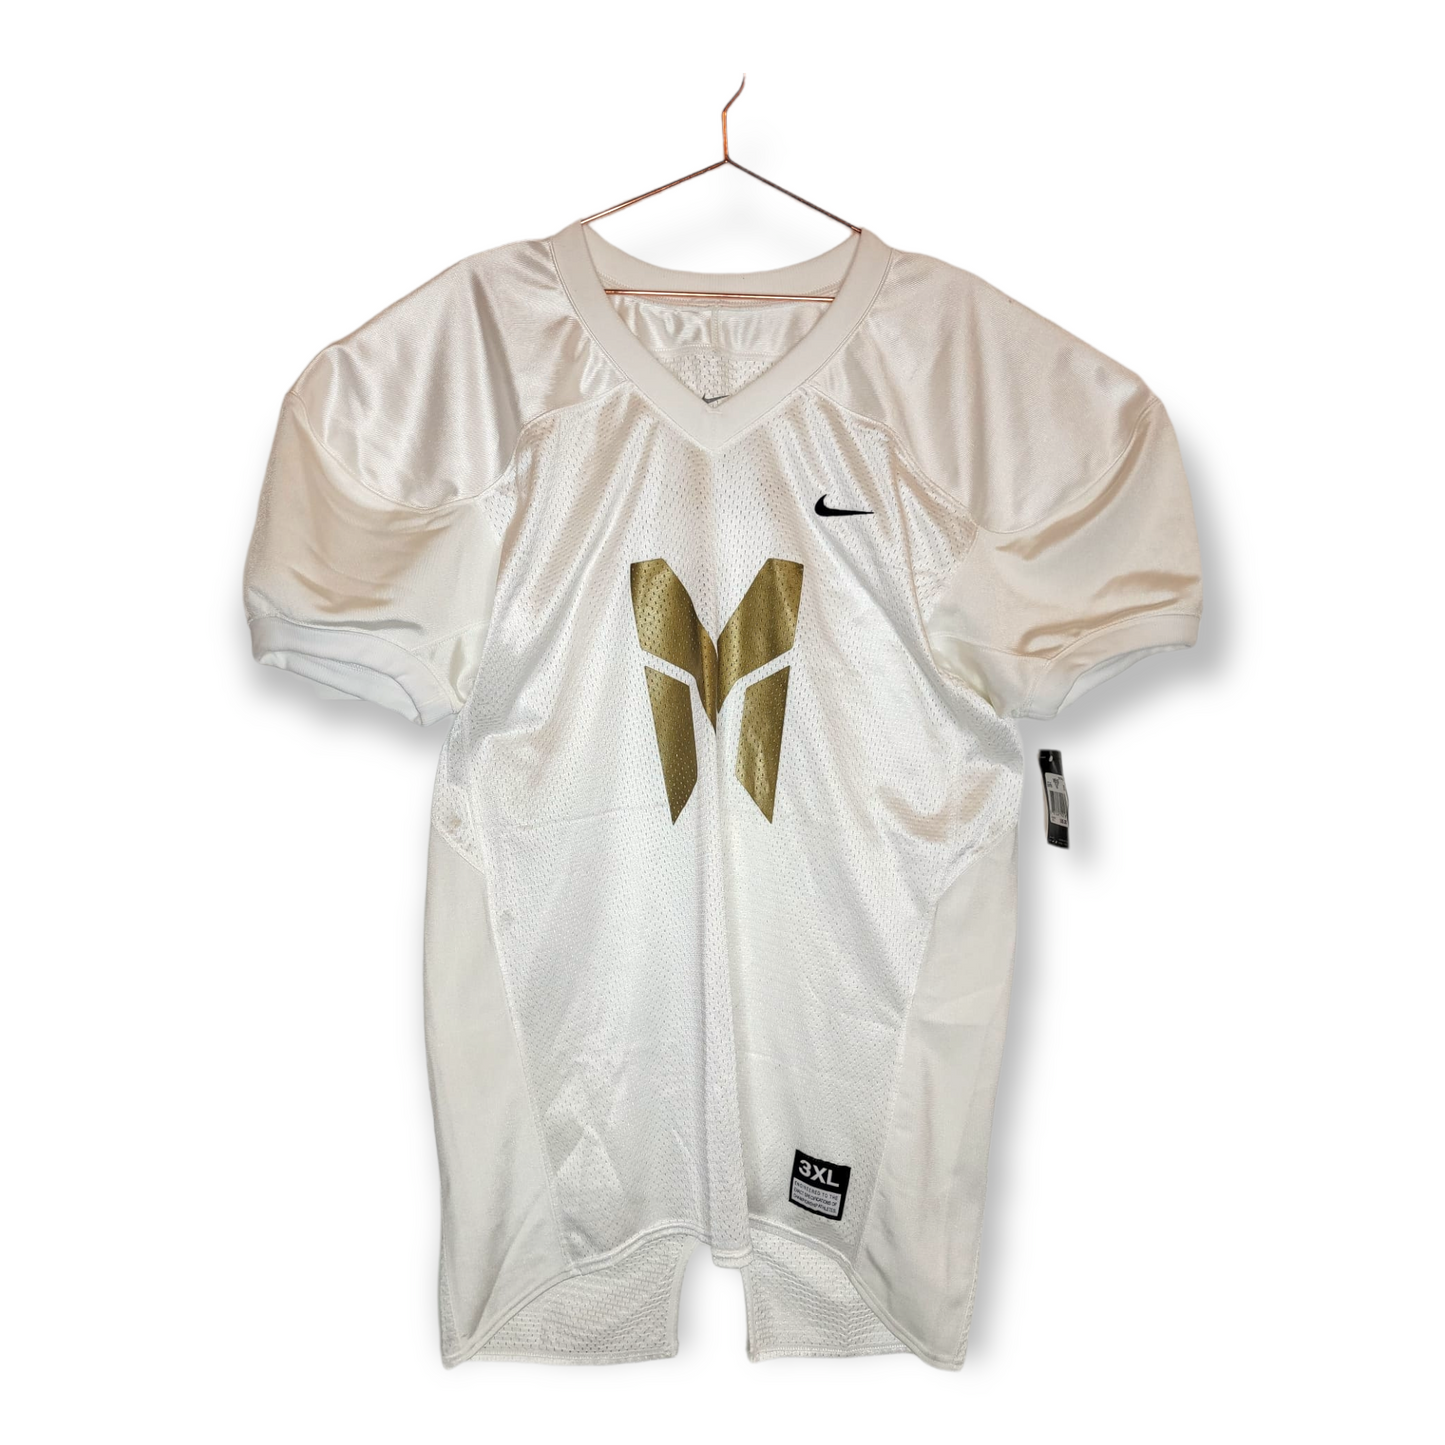 Men's White and Gold Gridiron Jersey (3XL)